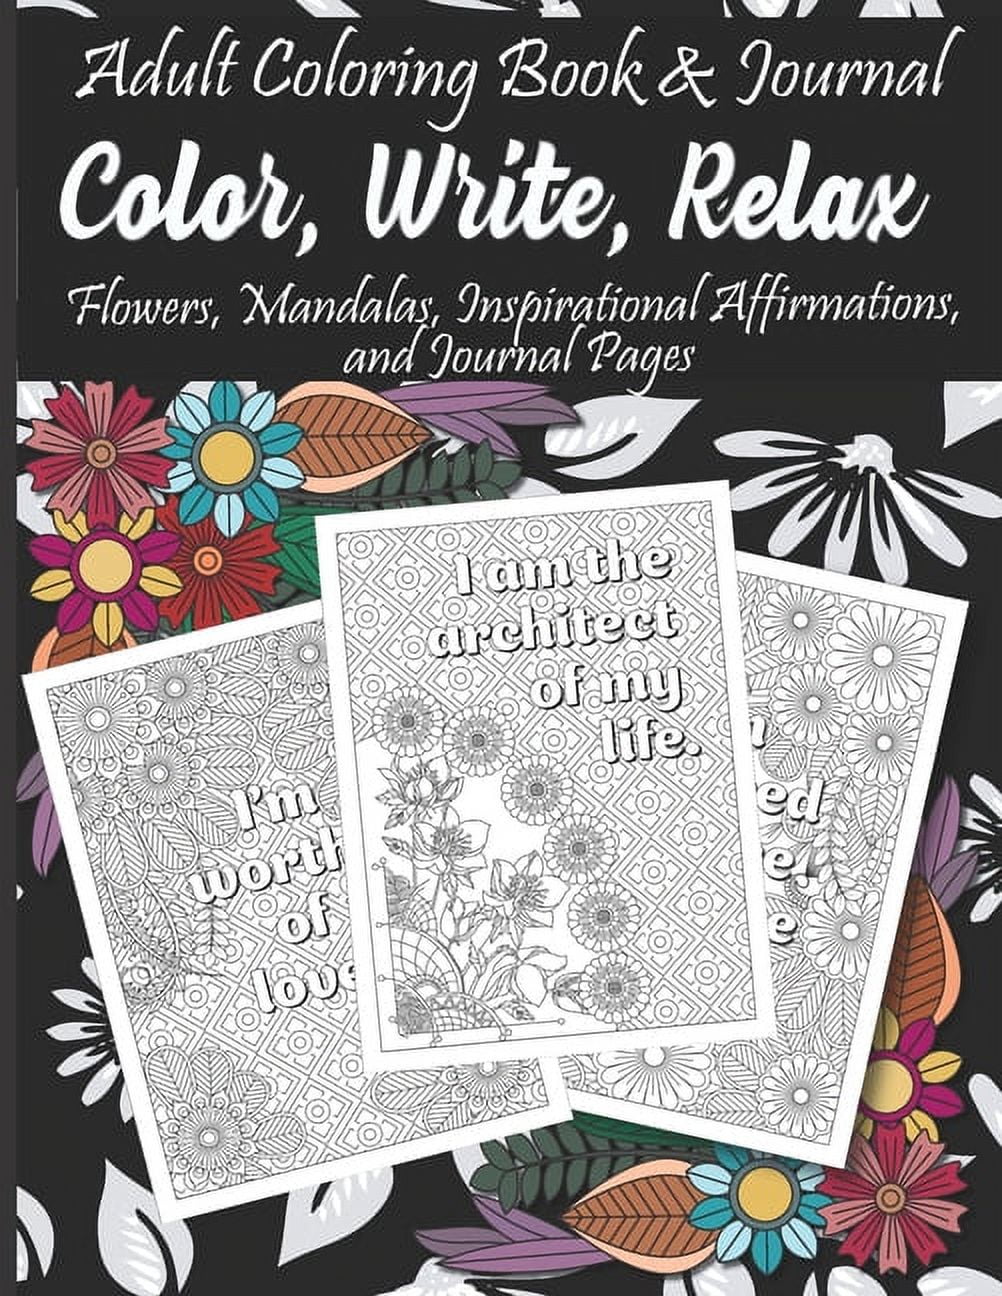 The 50 Best Adult Coloring Books to Relax, Laugh, and Unwind With